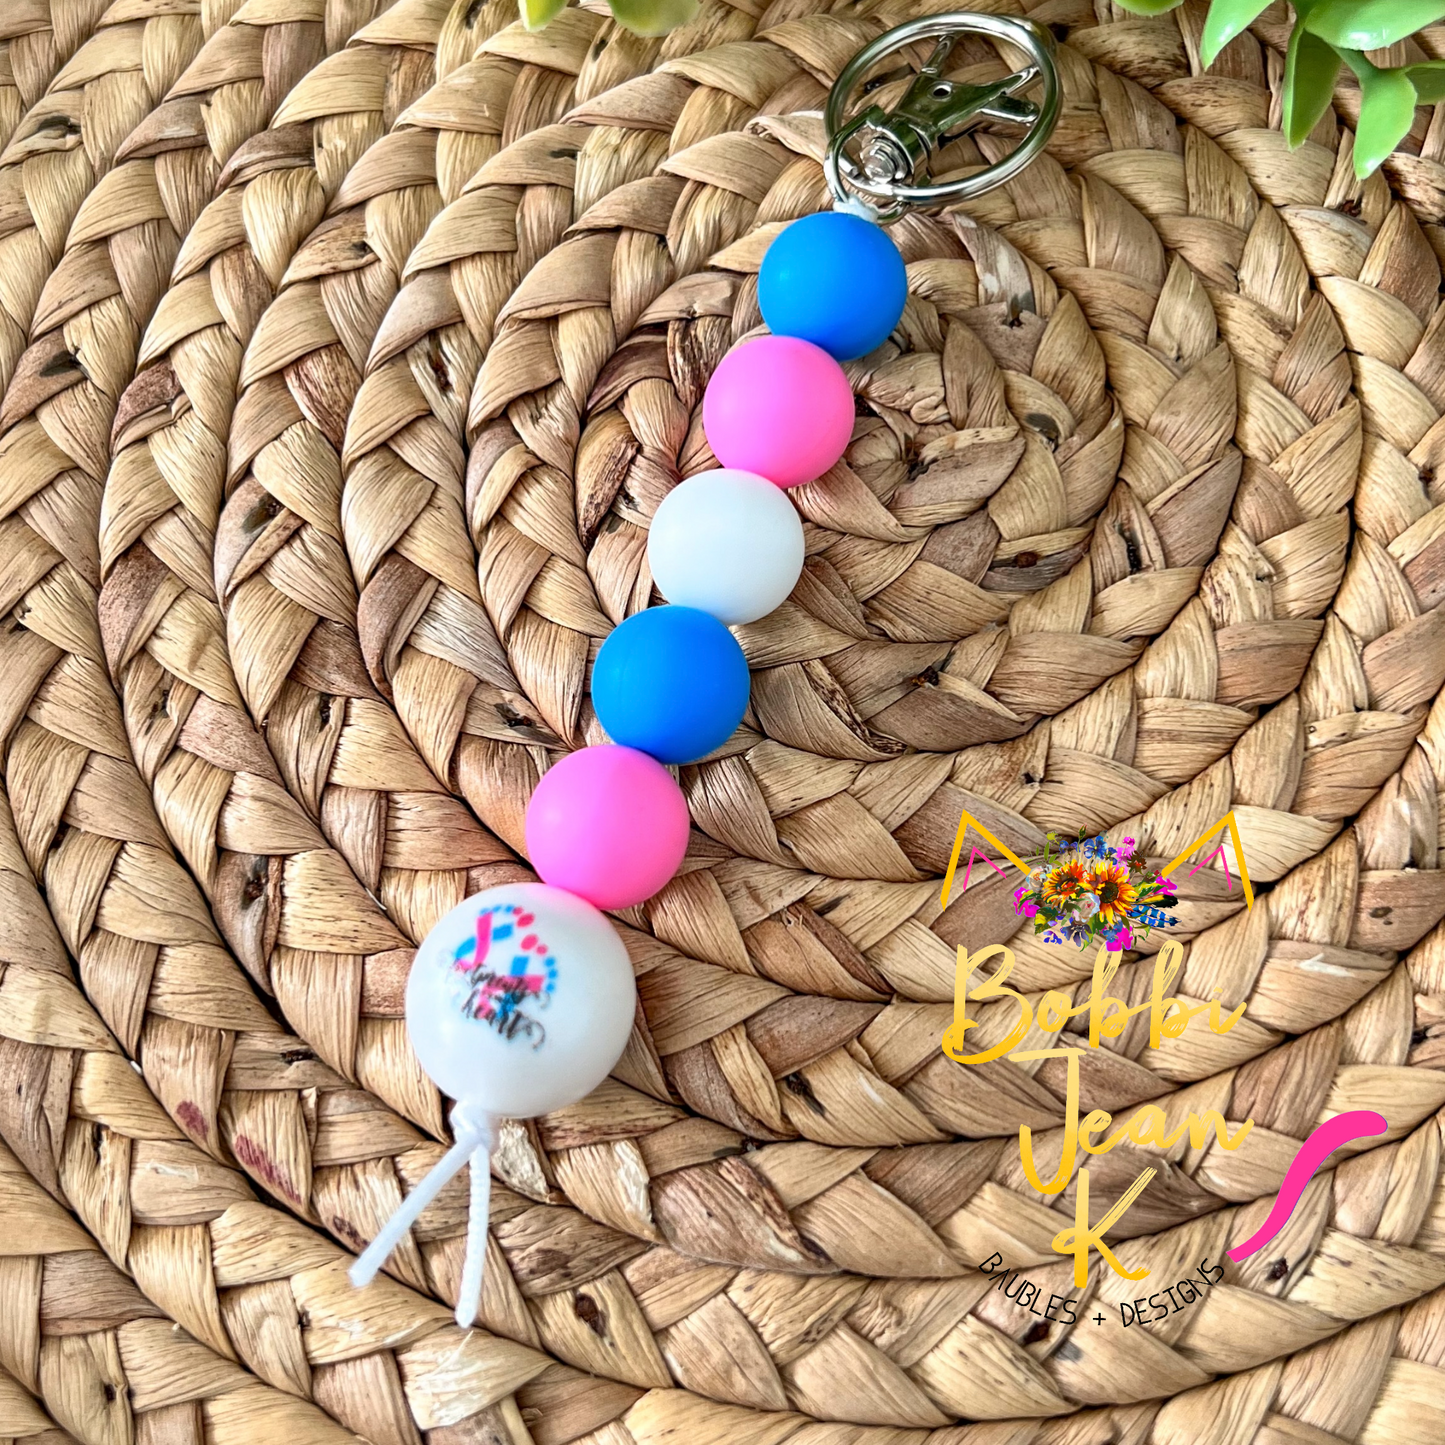 Footprints on My Heart Pink/Blue/White Silicone Beaded Keychain/Bag Charm